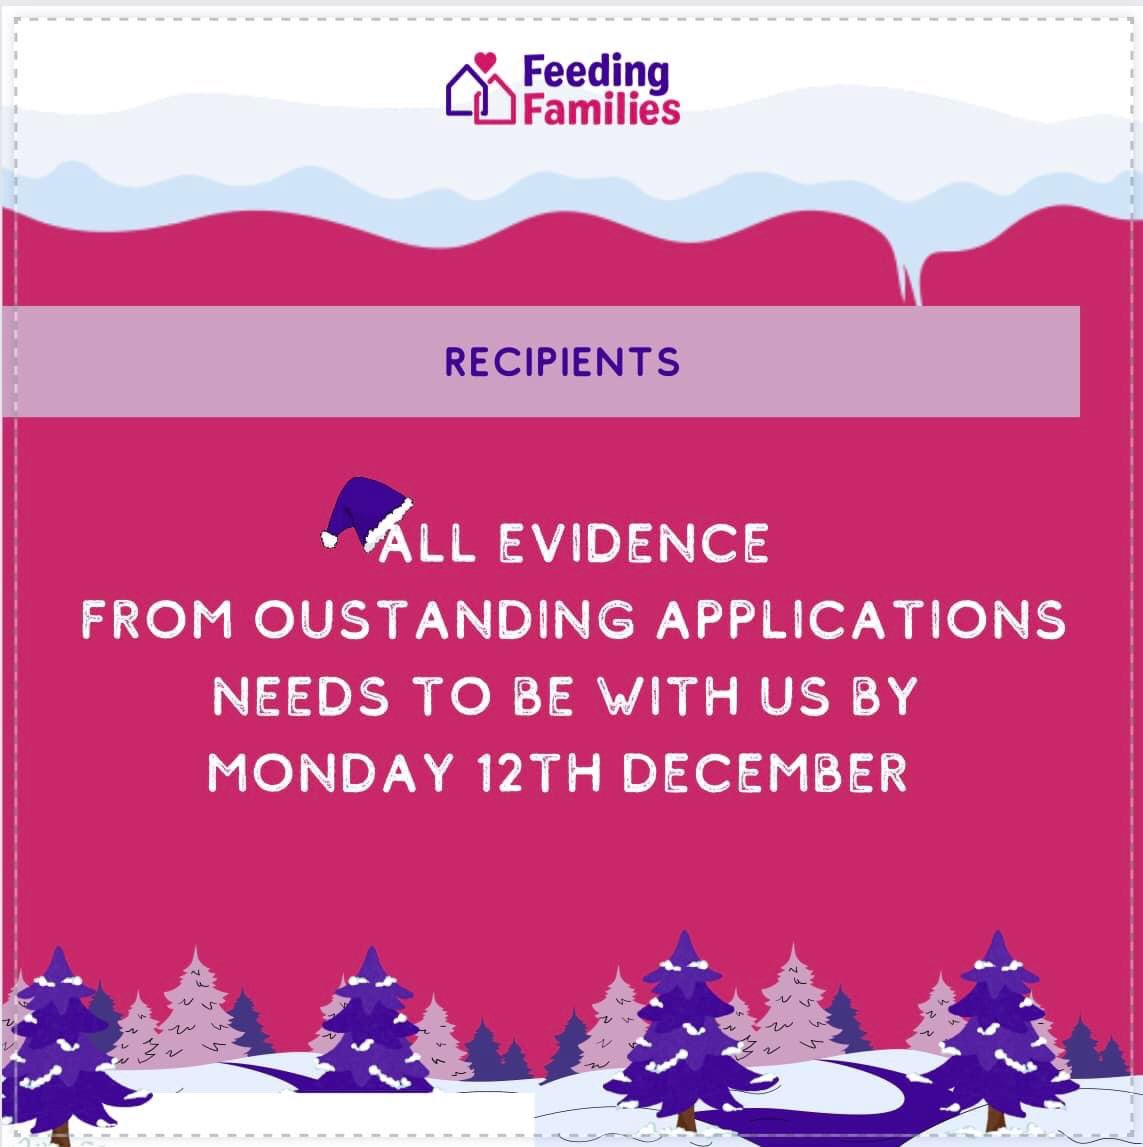 Please note that all evidence for outstanding applications must be received by Monday. If you haven’t received an email saying you are approved and matched then you must contact hampers@feedingfamilies.org.uk immediately